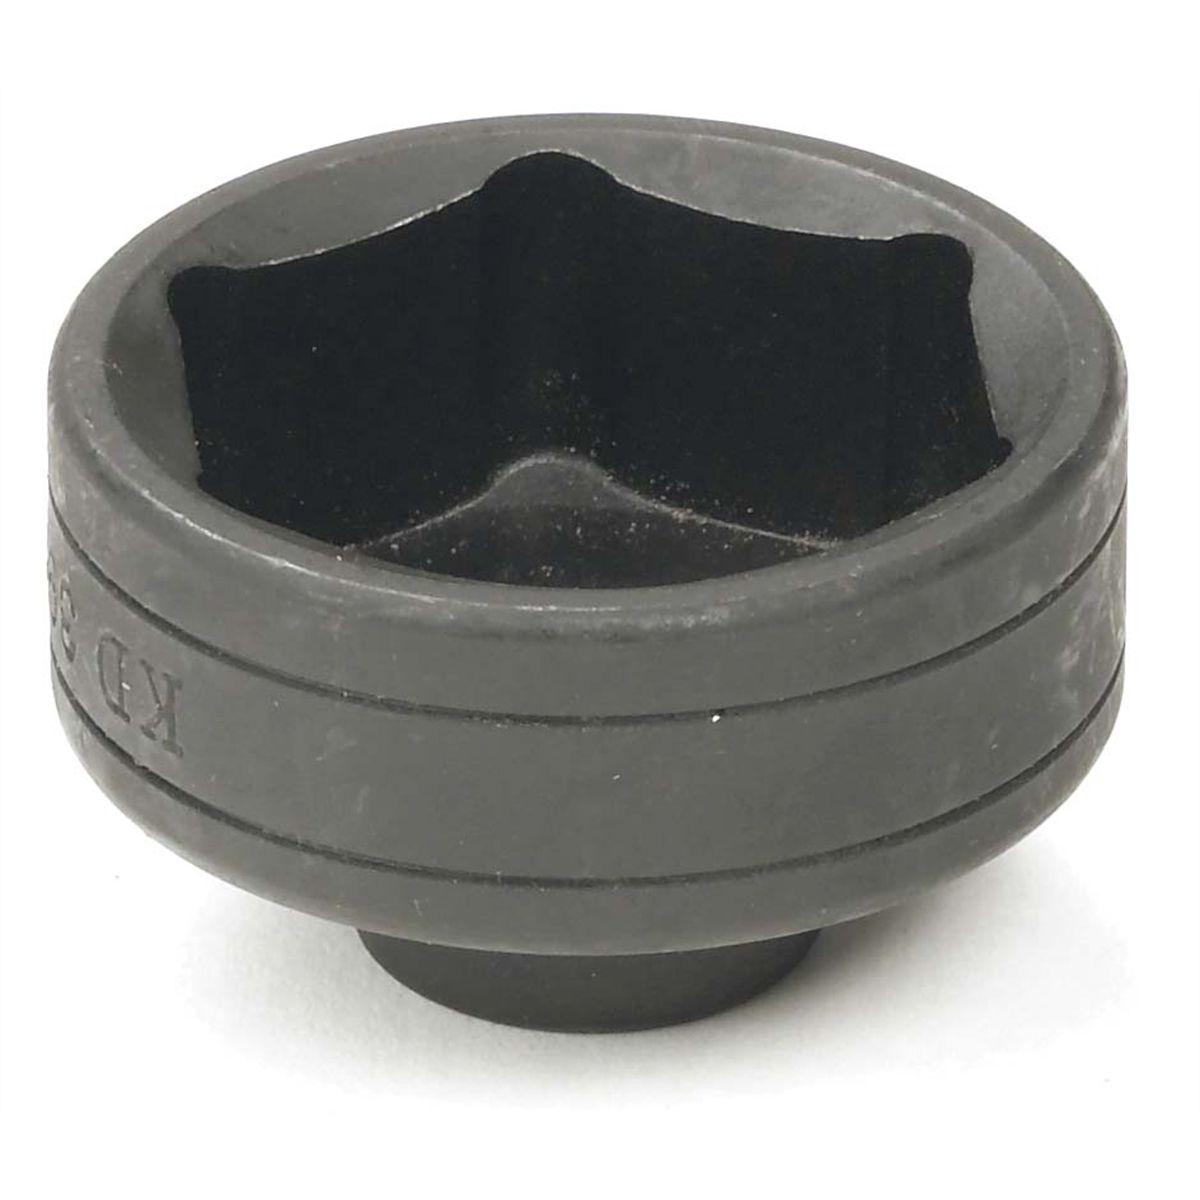 3/8 Inch Drive Oil Filter Cap Wrench Volvo, VW, Ford 36mm